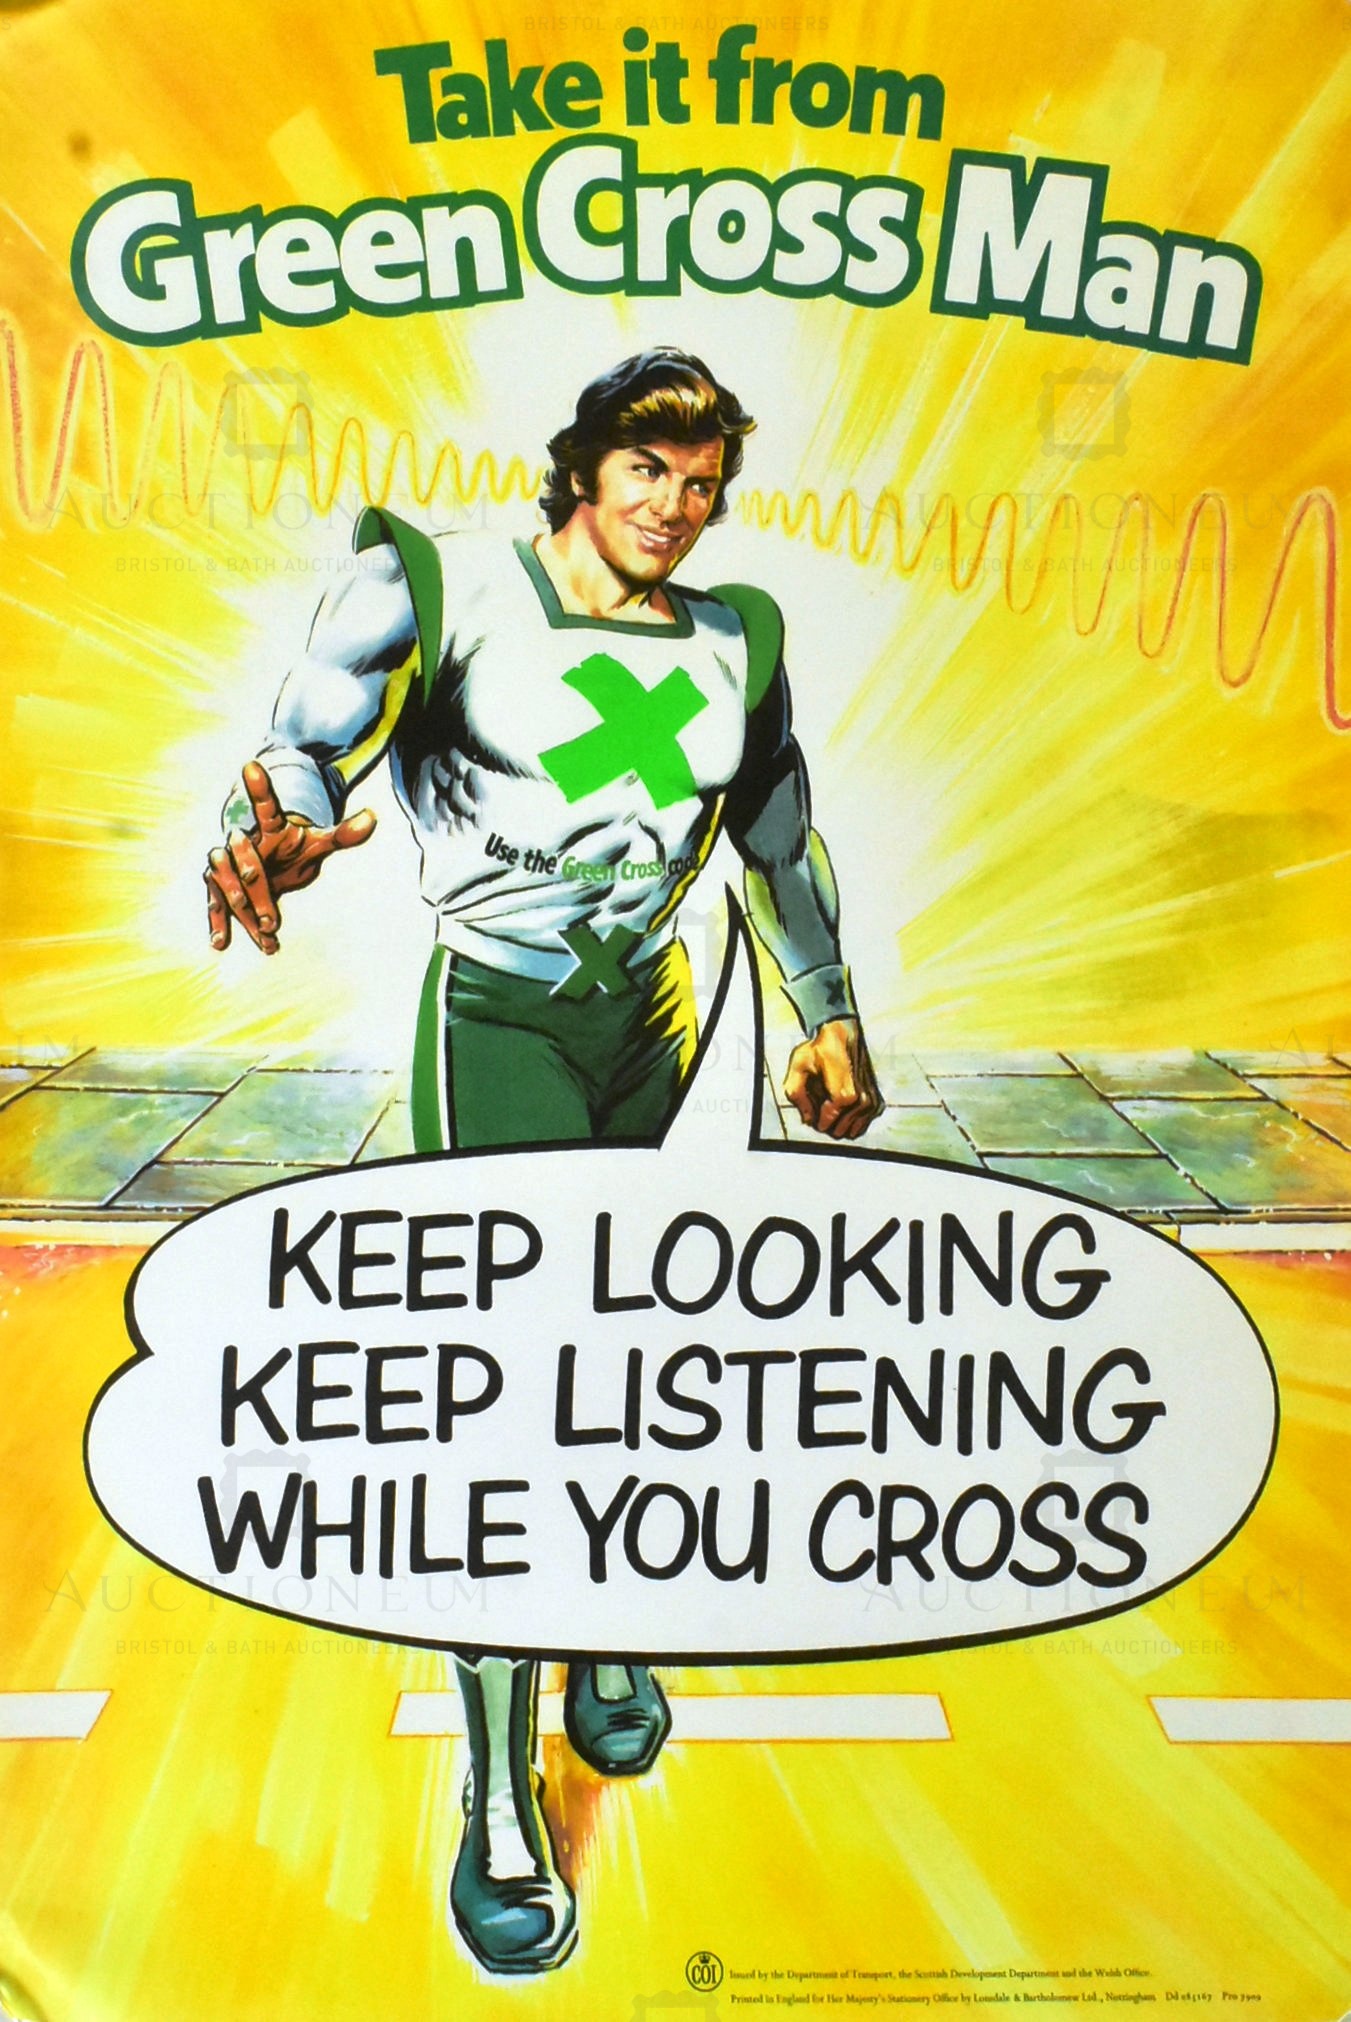 ESTATE OF DAVE PROWSE - ORIGINAL 1970S GREEN CROSS CODE MAN POSTER - Image 2 of 3